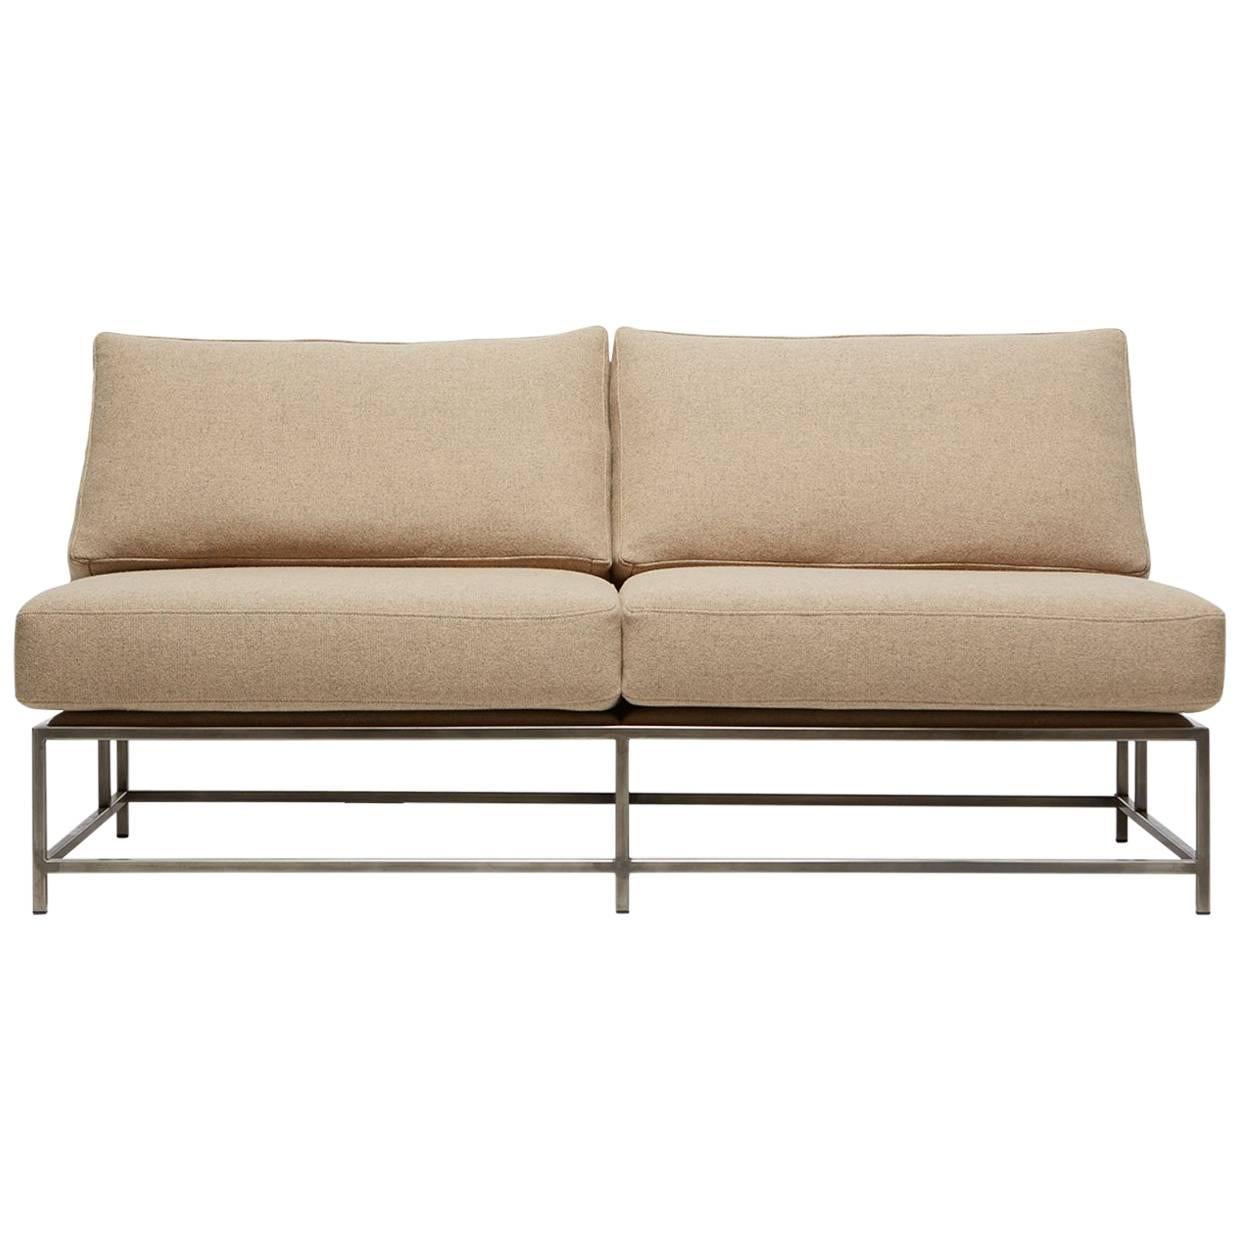 Tan Wool and Antique Nickel Loveseat For Sale